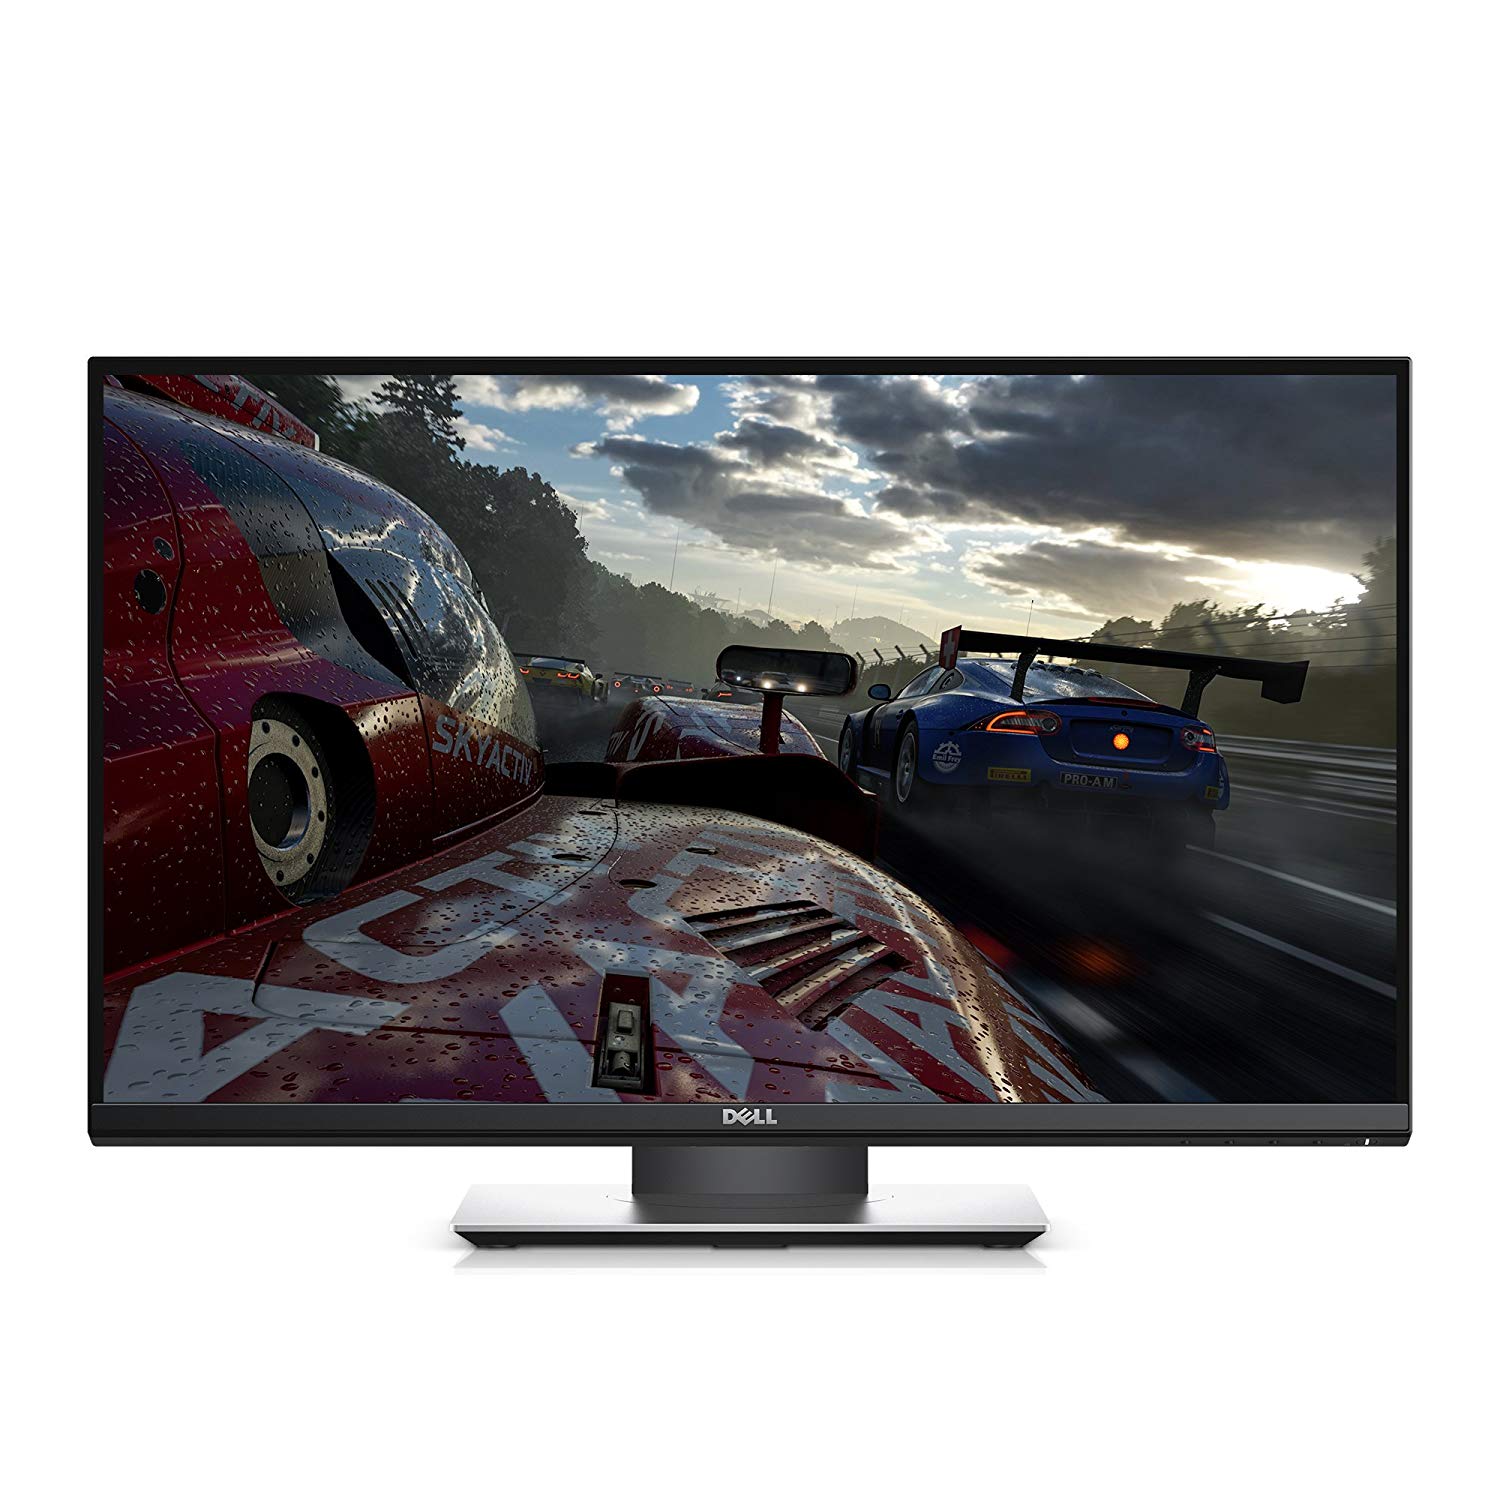 Dell Optimized All Operating System Gaming Monitor